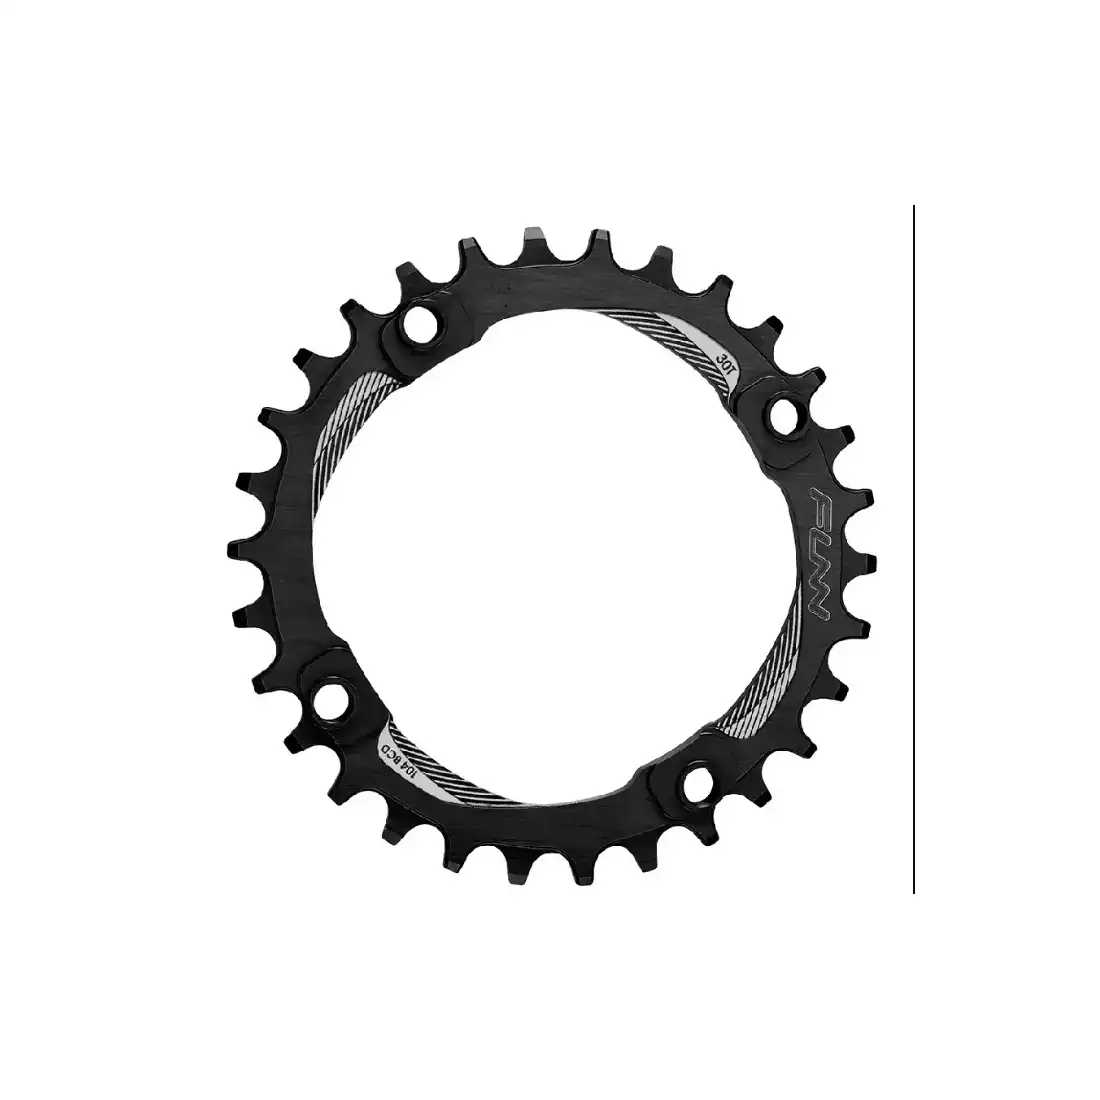 FUNN SOLO BCD bicycle sprocket for cranks 36T black